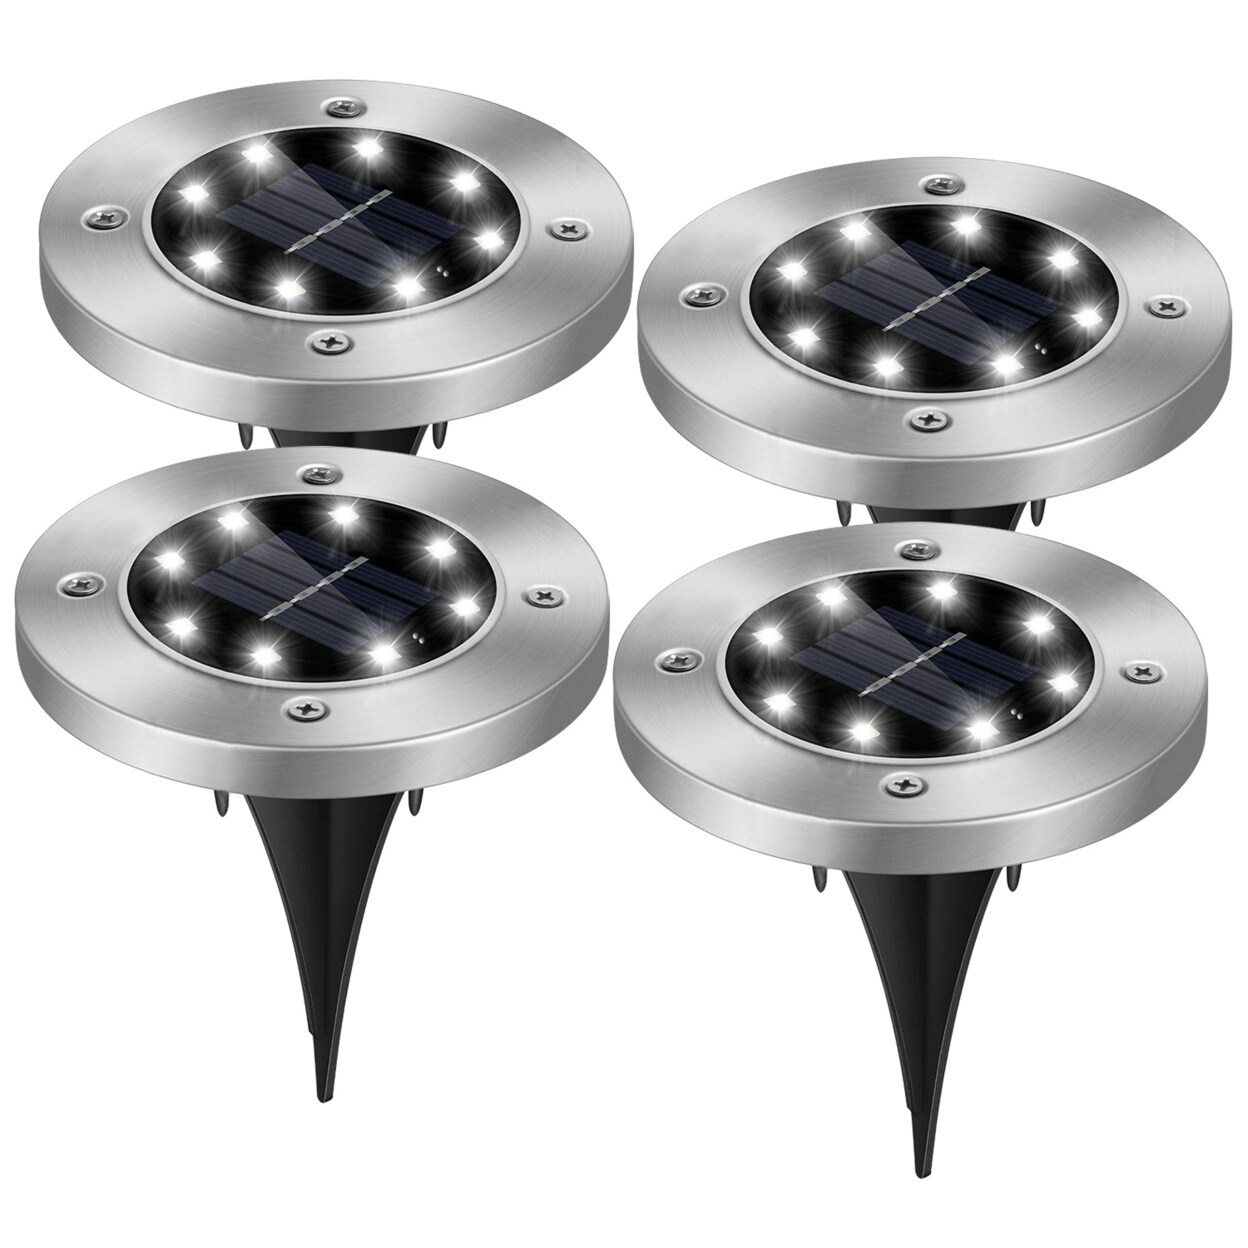 Global Phoenix 4Pcs Solar Powered Ground Light Outdoor IP65 Waterproof Buried In-Ground Lamp Decorative Path Deck Lawn Patio Lamp